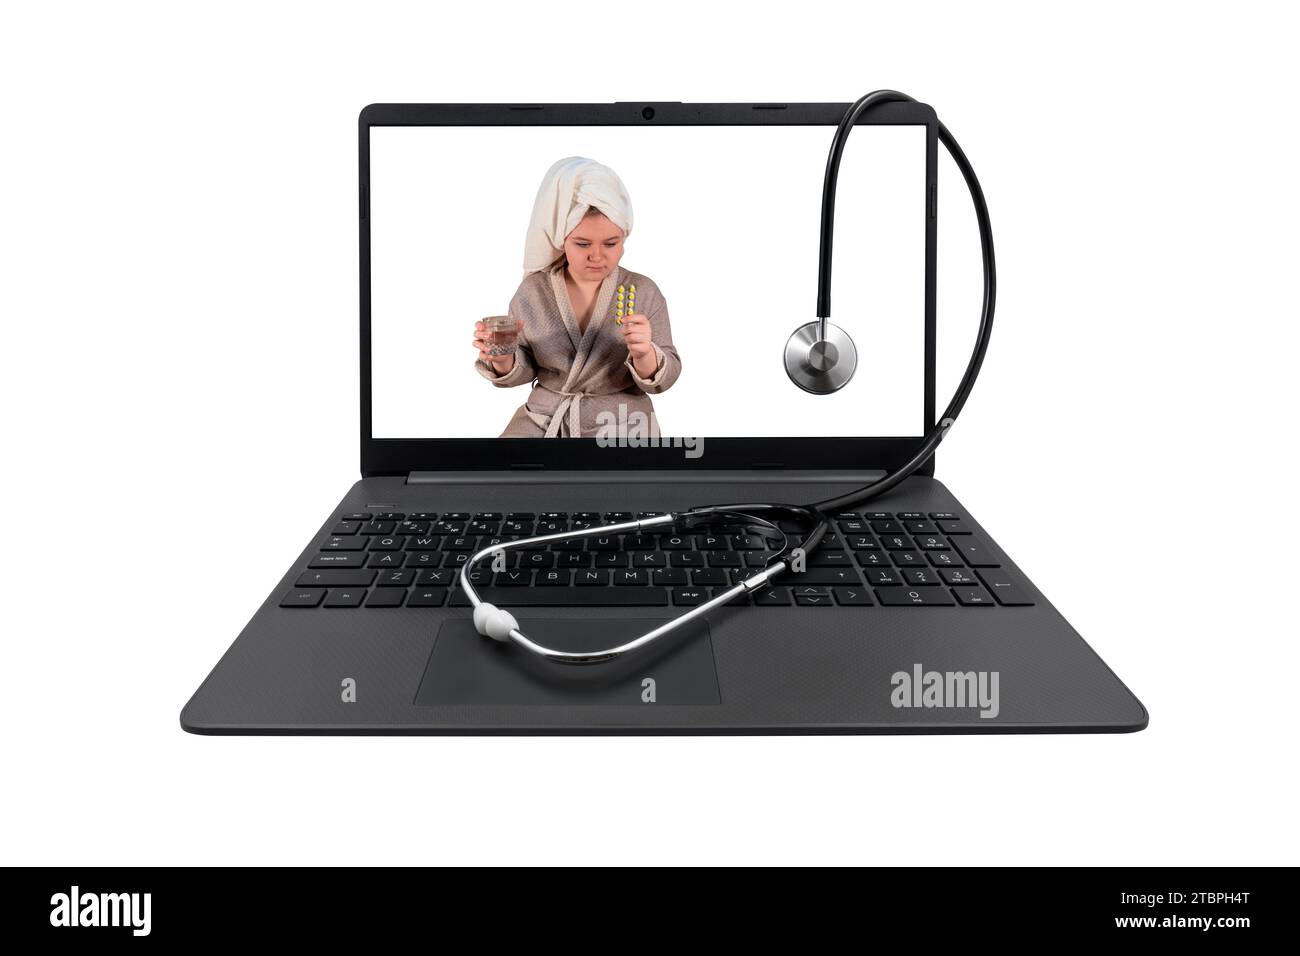 Laptop and medical stethoscope on white background. On the laptop screen - a girl with cold symptoms holds a blister with pills and a glass of water Stock Photo